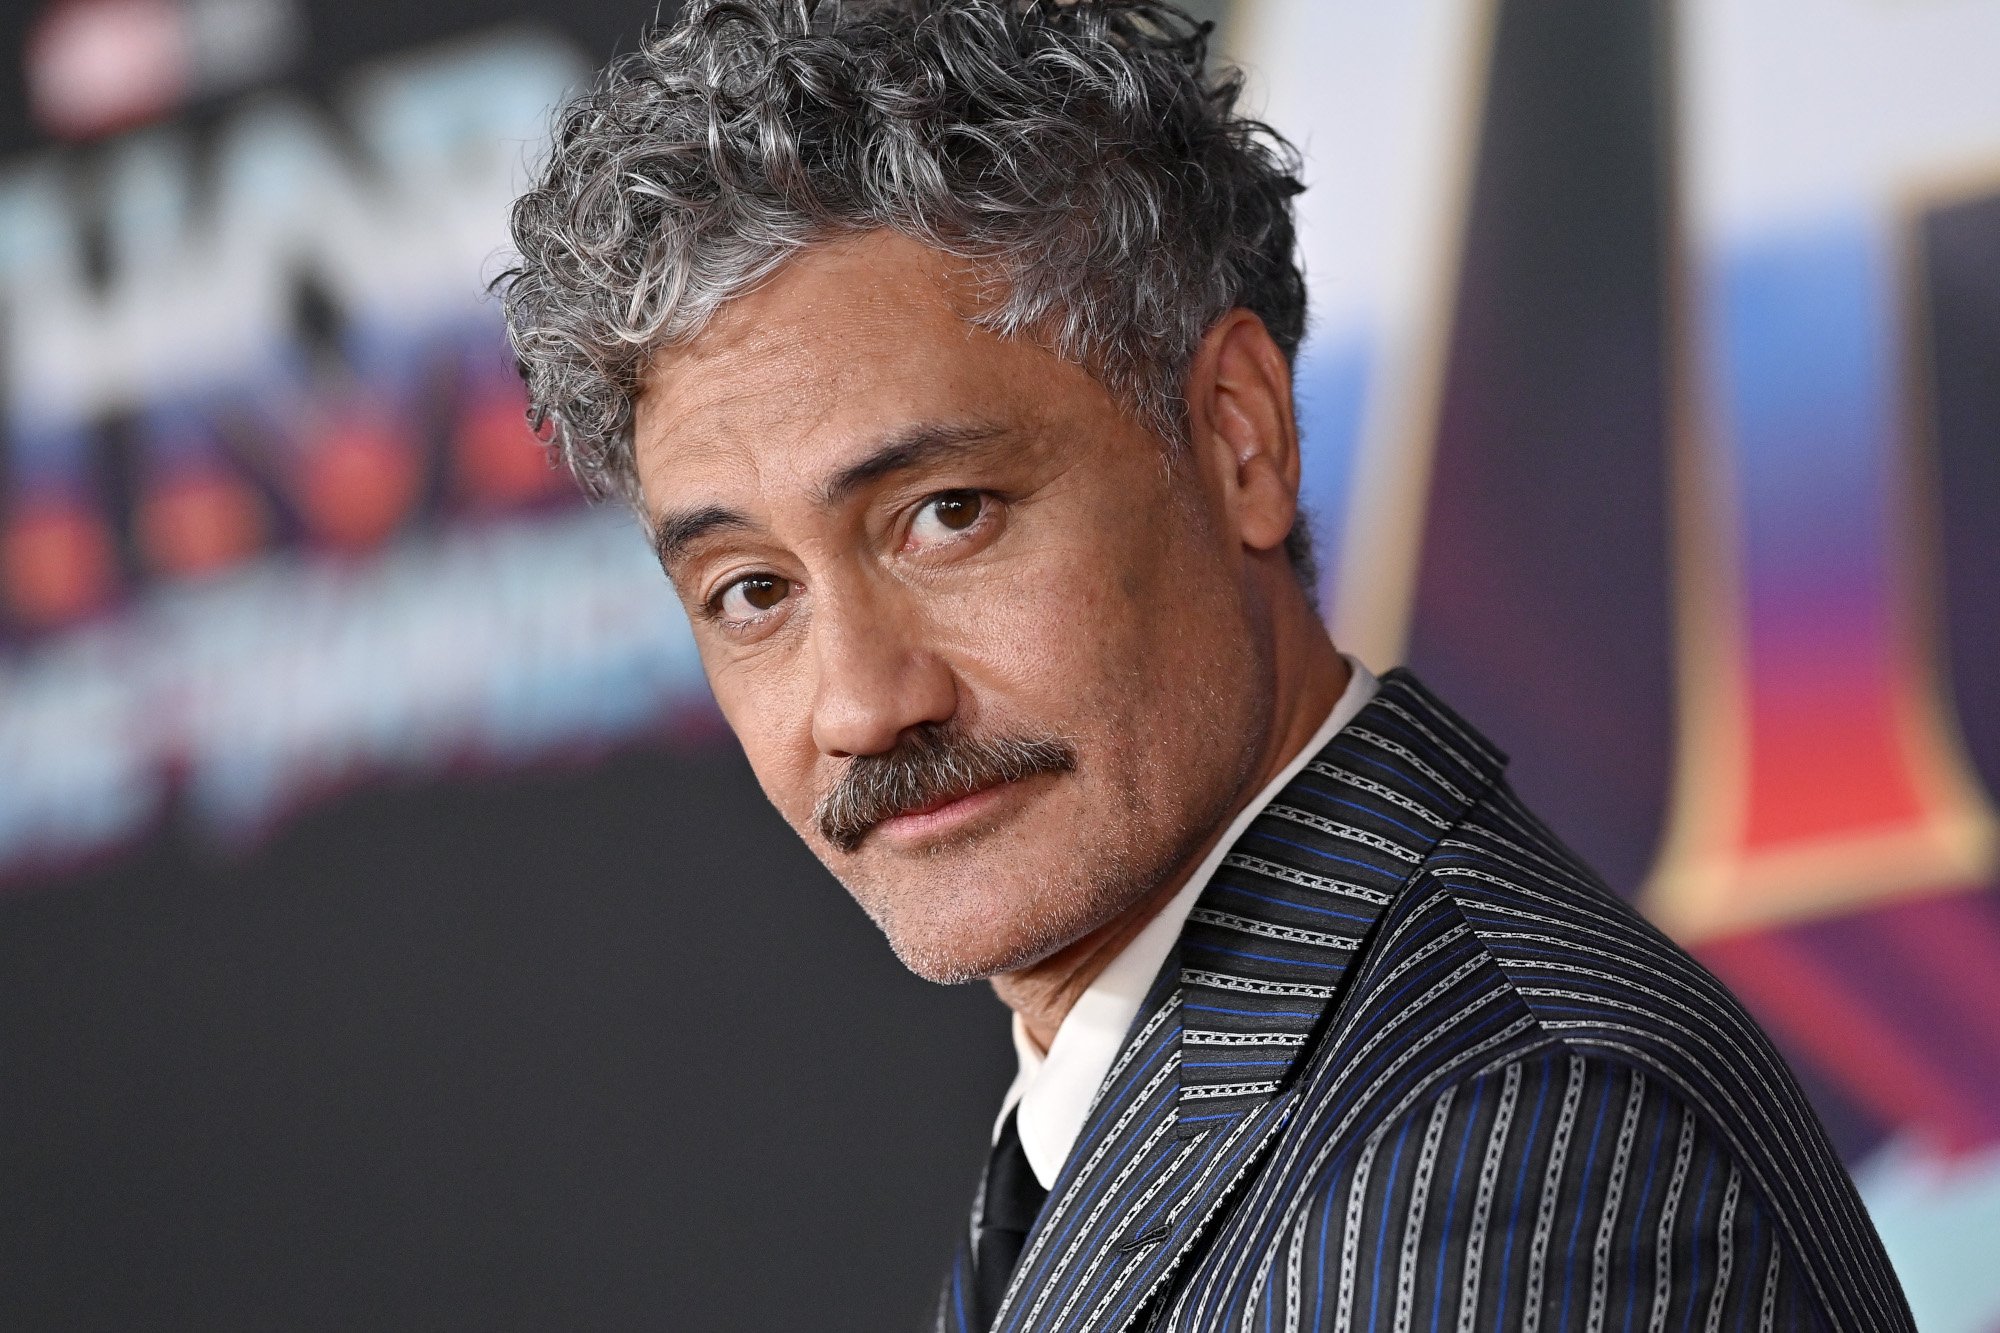 Taika Waititi, who will helm an upcoming 'Star Wars' movie. He's on the red carpet for 'Thor: Love and Thunder,' and he's wearing a black suit with white stripes.